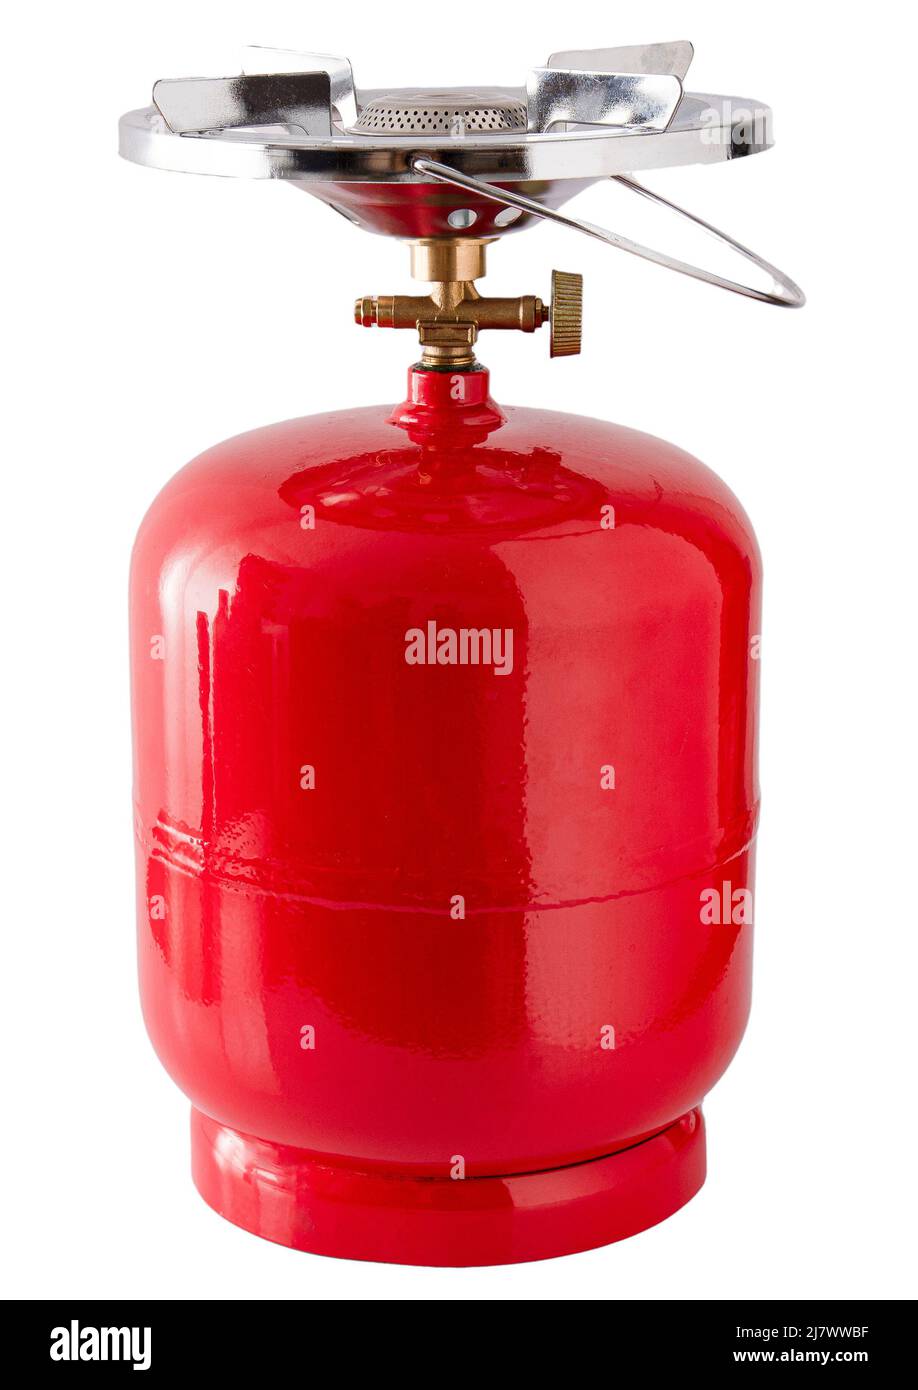 https://c8.alamy.com/comp/2J7WWBF/portable-gas-bottle-a-small-compact-travel-bottle-with-a-burner-for-cooking-on-a-hike-the-road-gas-stove-is-filled-with-propane-red-tank-2J7WWBF.jpg